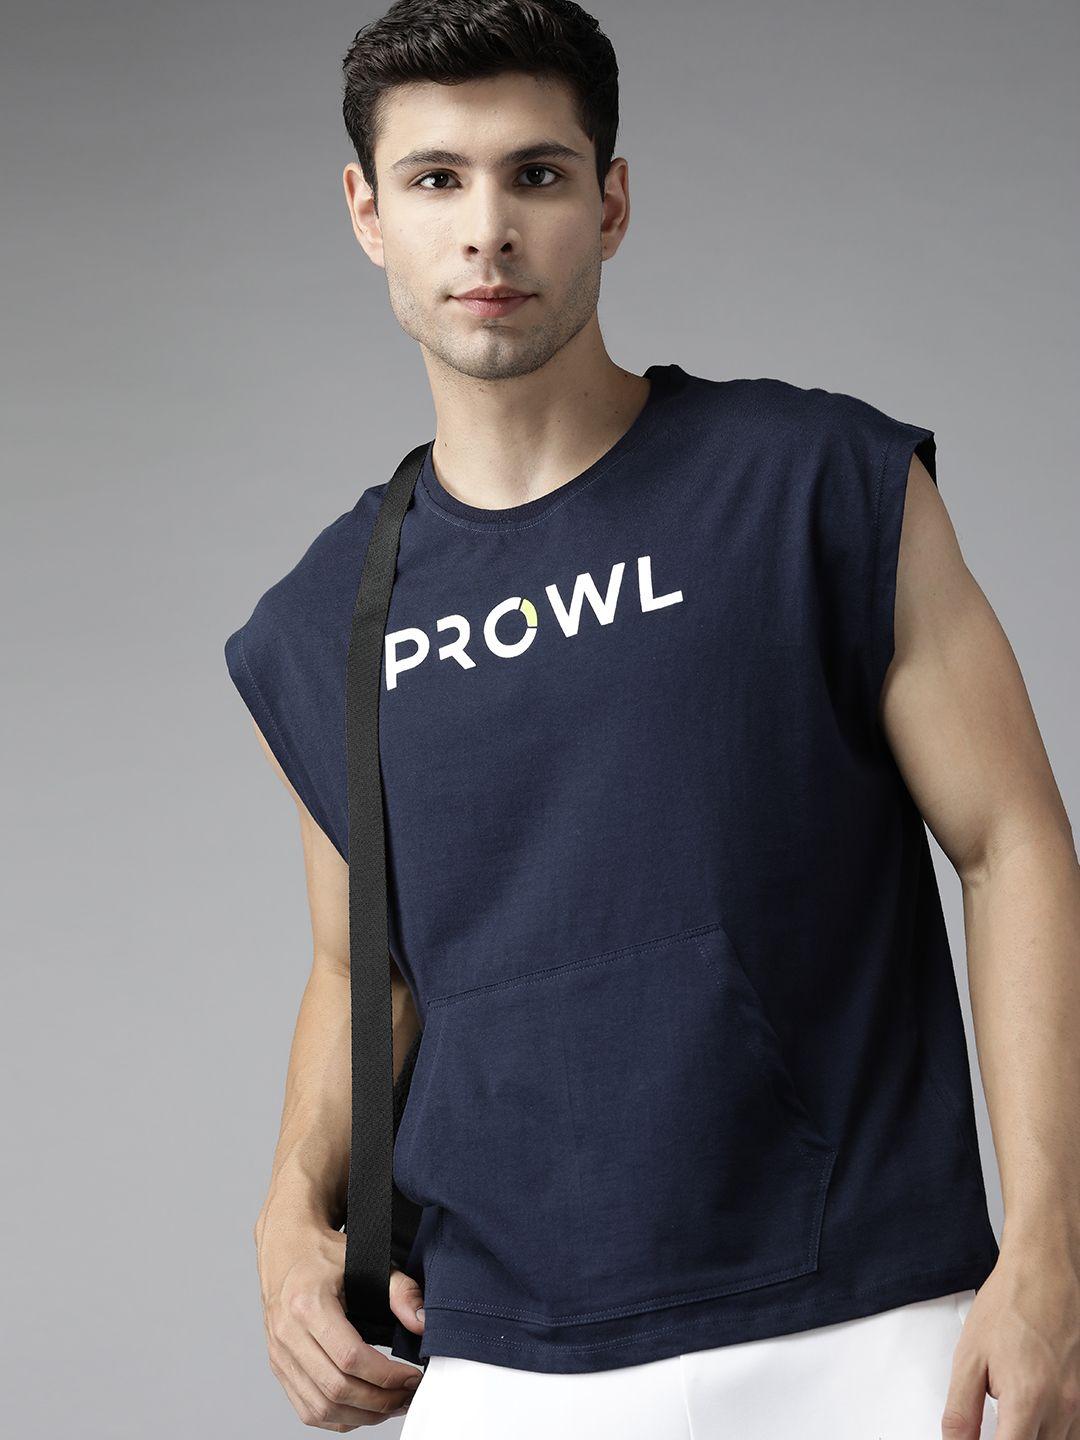 prowl by tiger shroff men navy blue & white pure cotton brand logo printed extended sleeves t-shirt